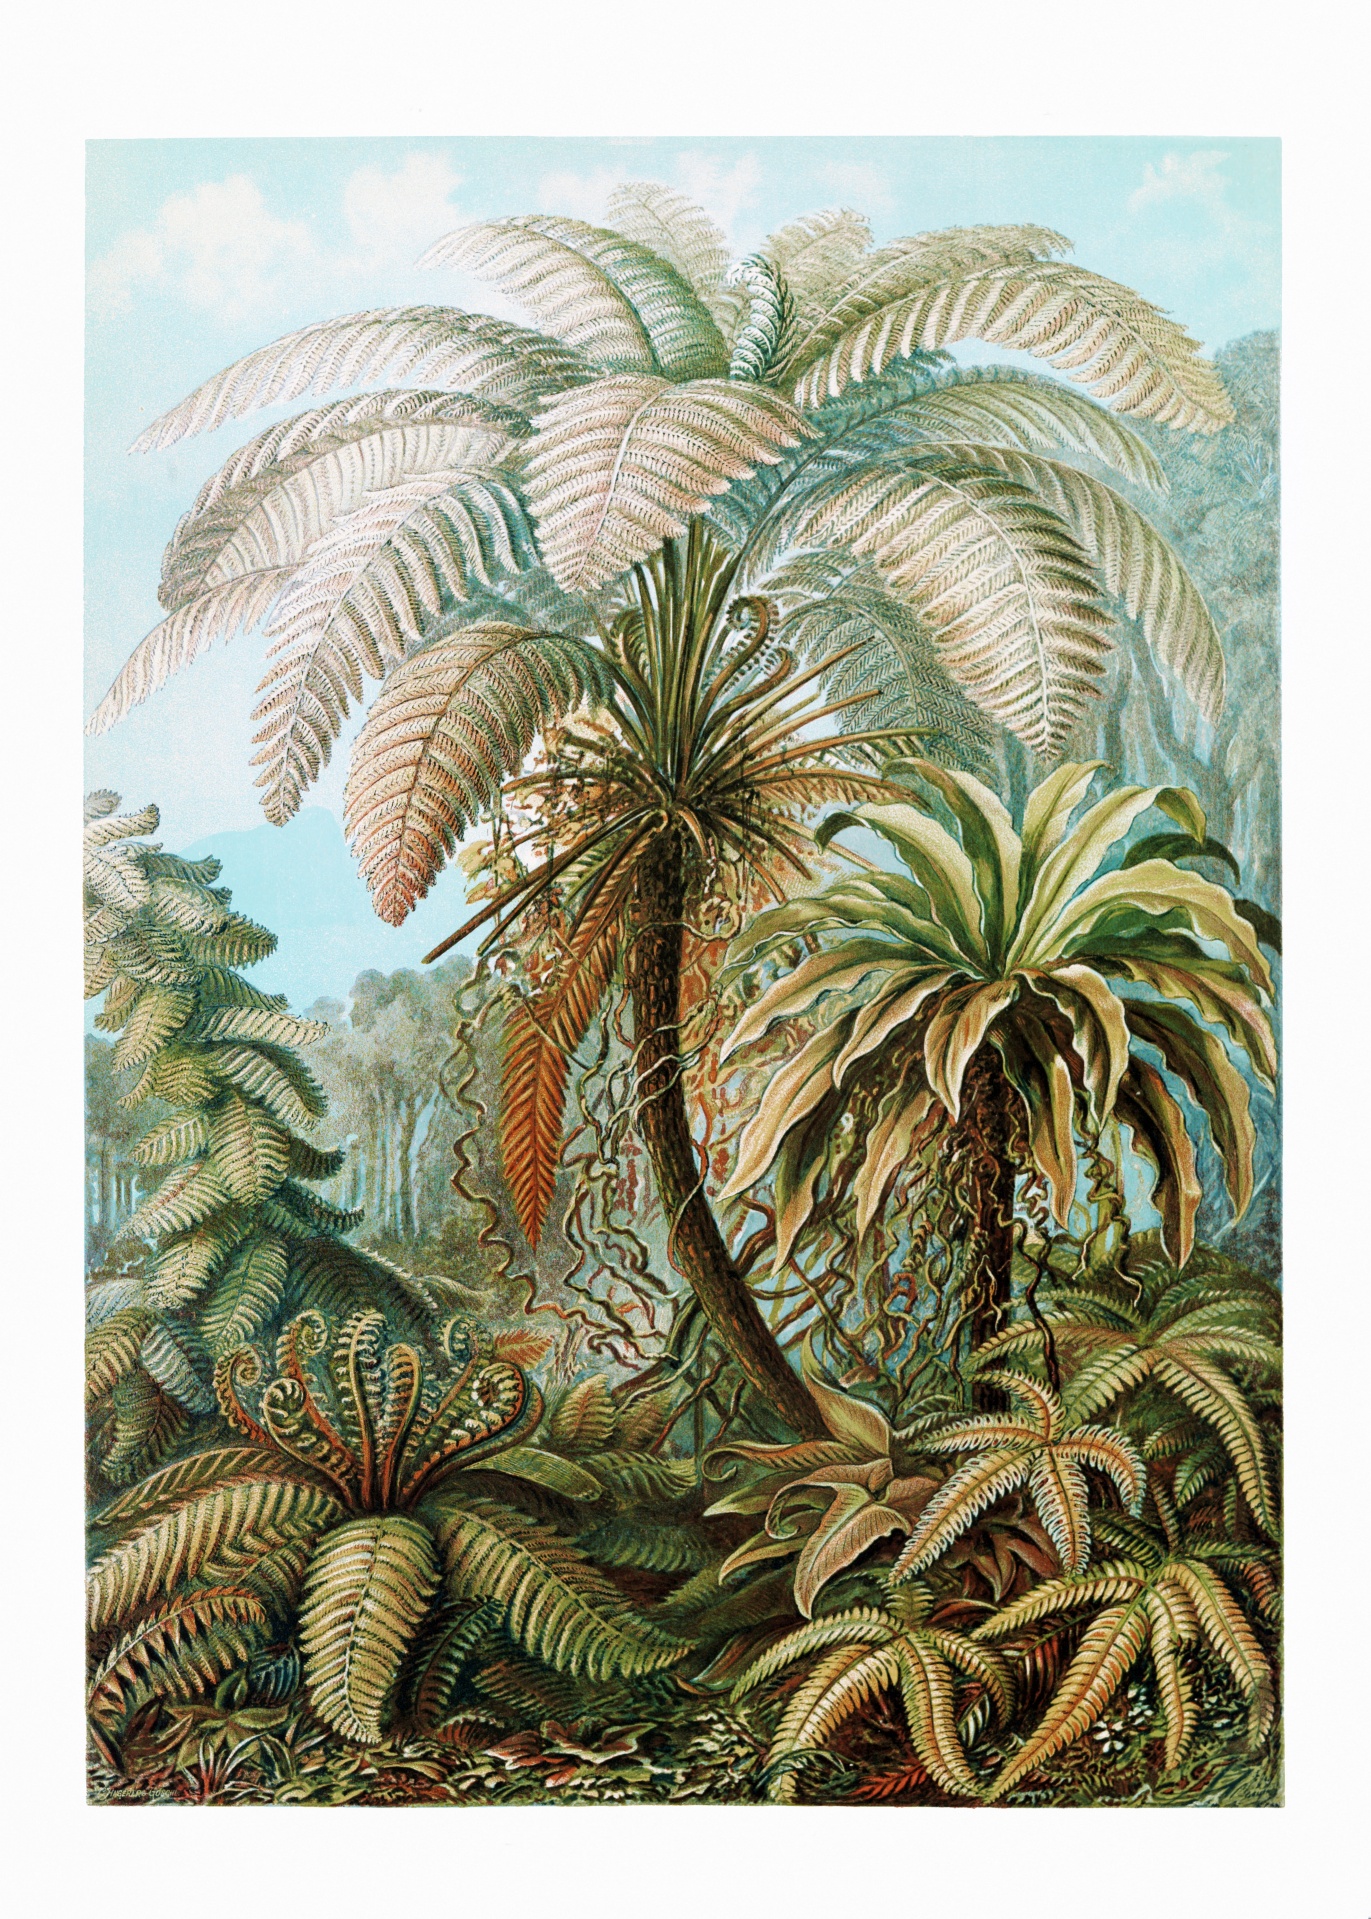 Jungle wilderness jungle vintage 1900 century old antique poster retro palm trees nature blackboard painting hand painted art wallpaper illustration colors colorful background plants flowers blossoms amazon